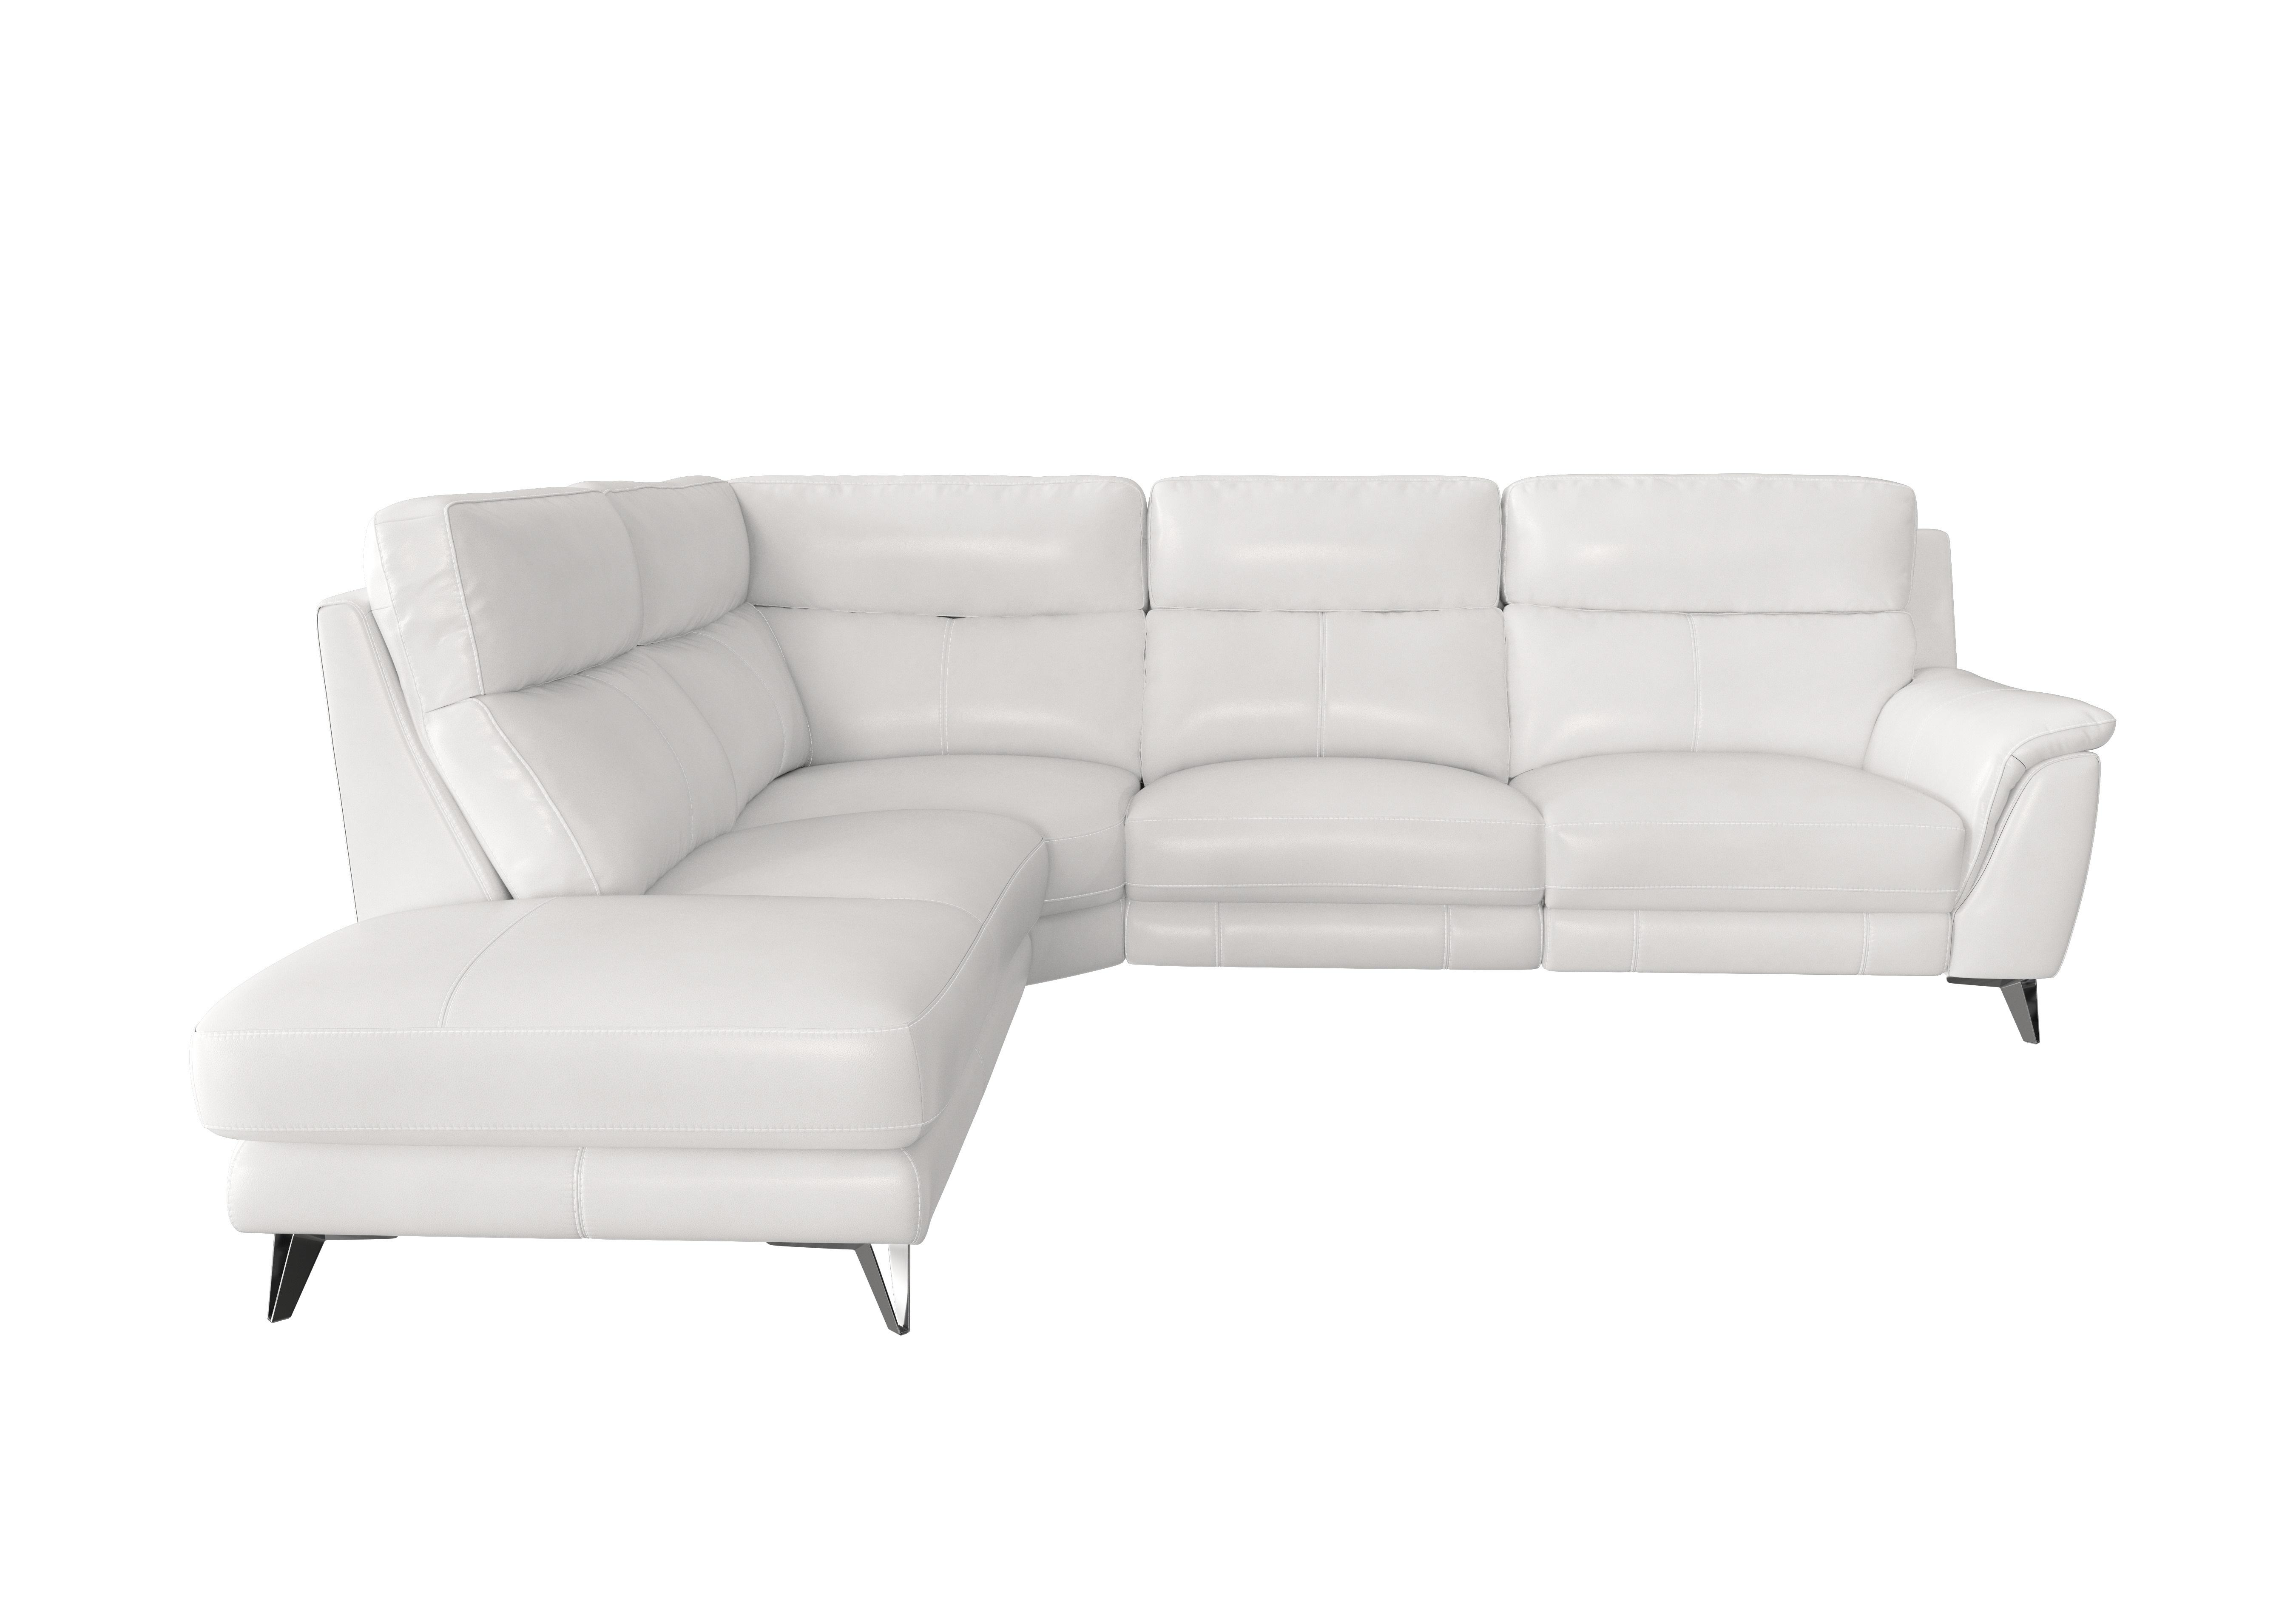 Contempo Chaise End Leather Sofa in Bv-744d Star White on Furniture Village